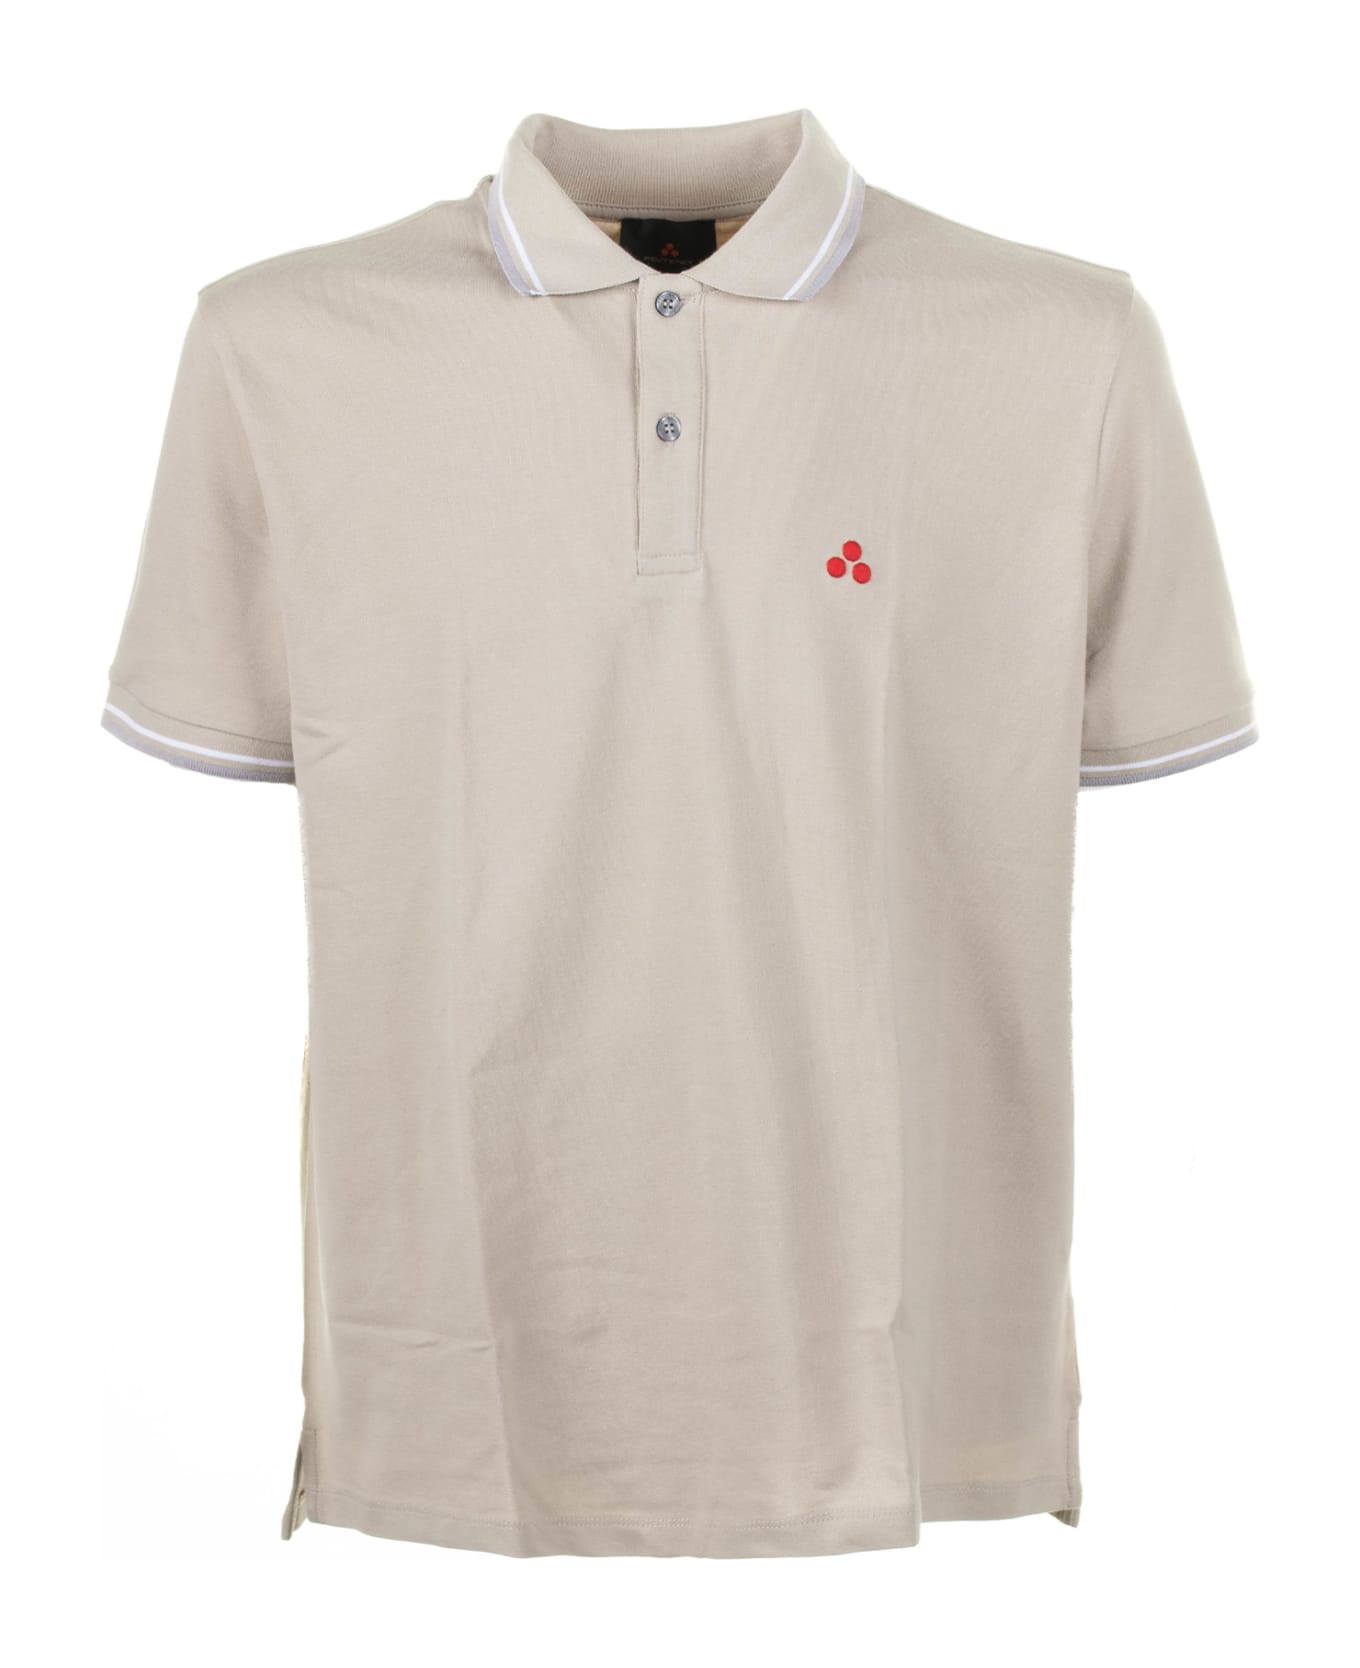 Peuterey Beige Polo Shirt With Contrasting Logo - SABBIA ポロシャツ